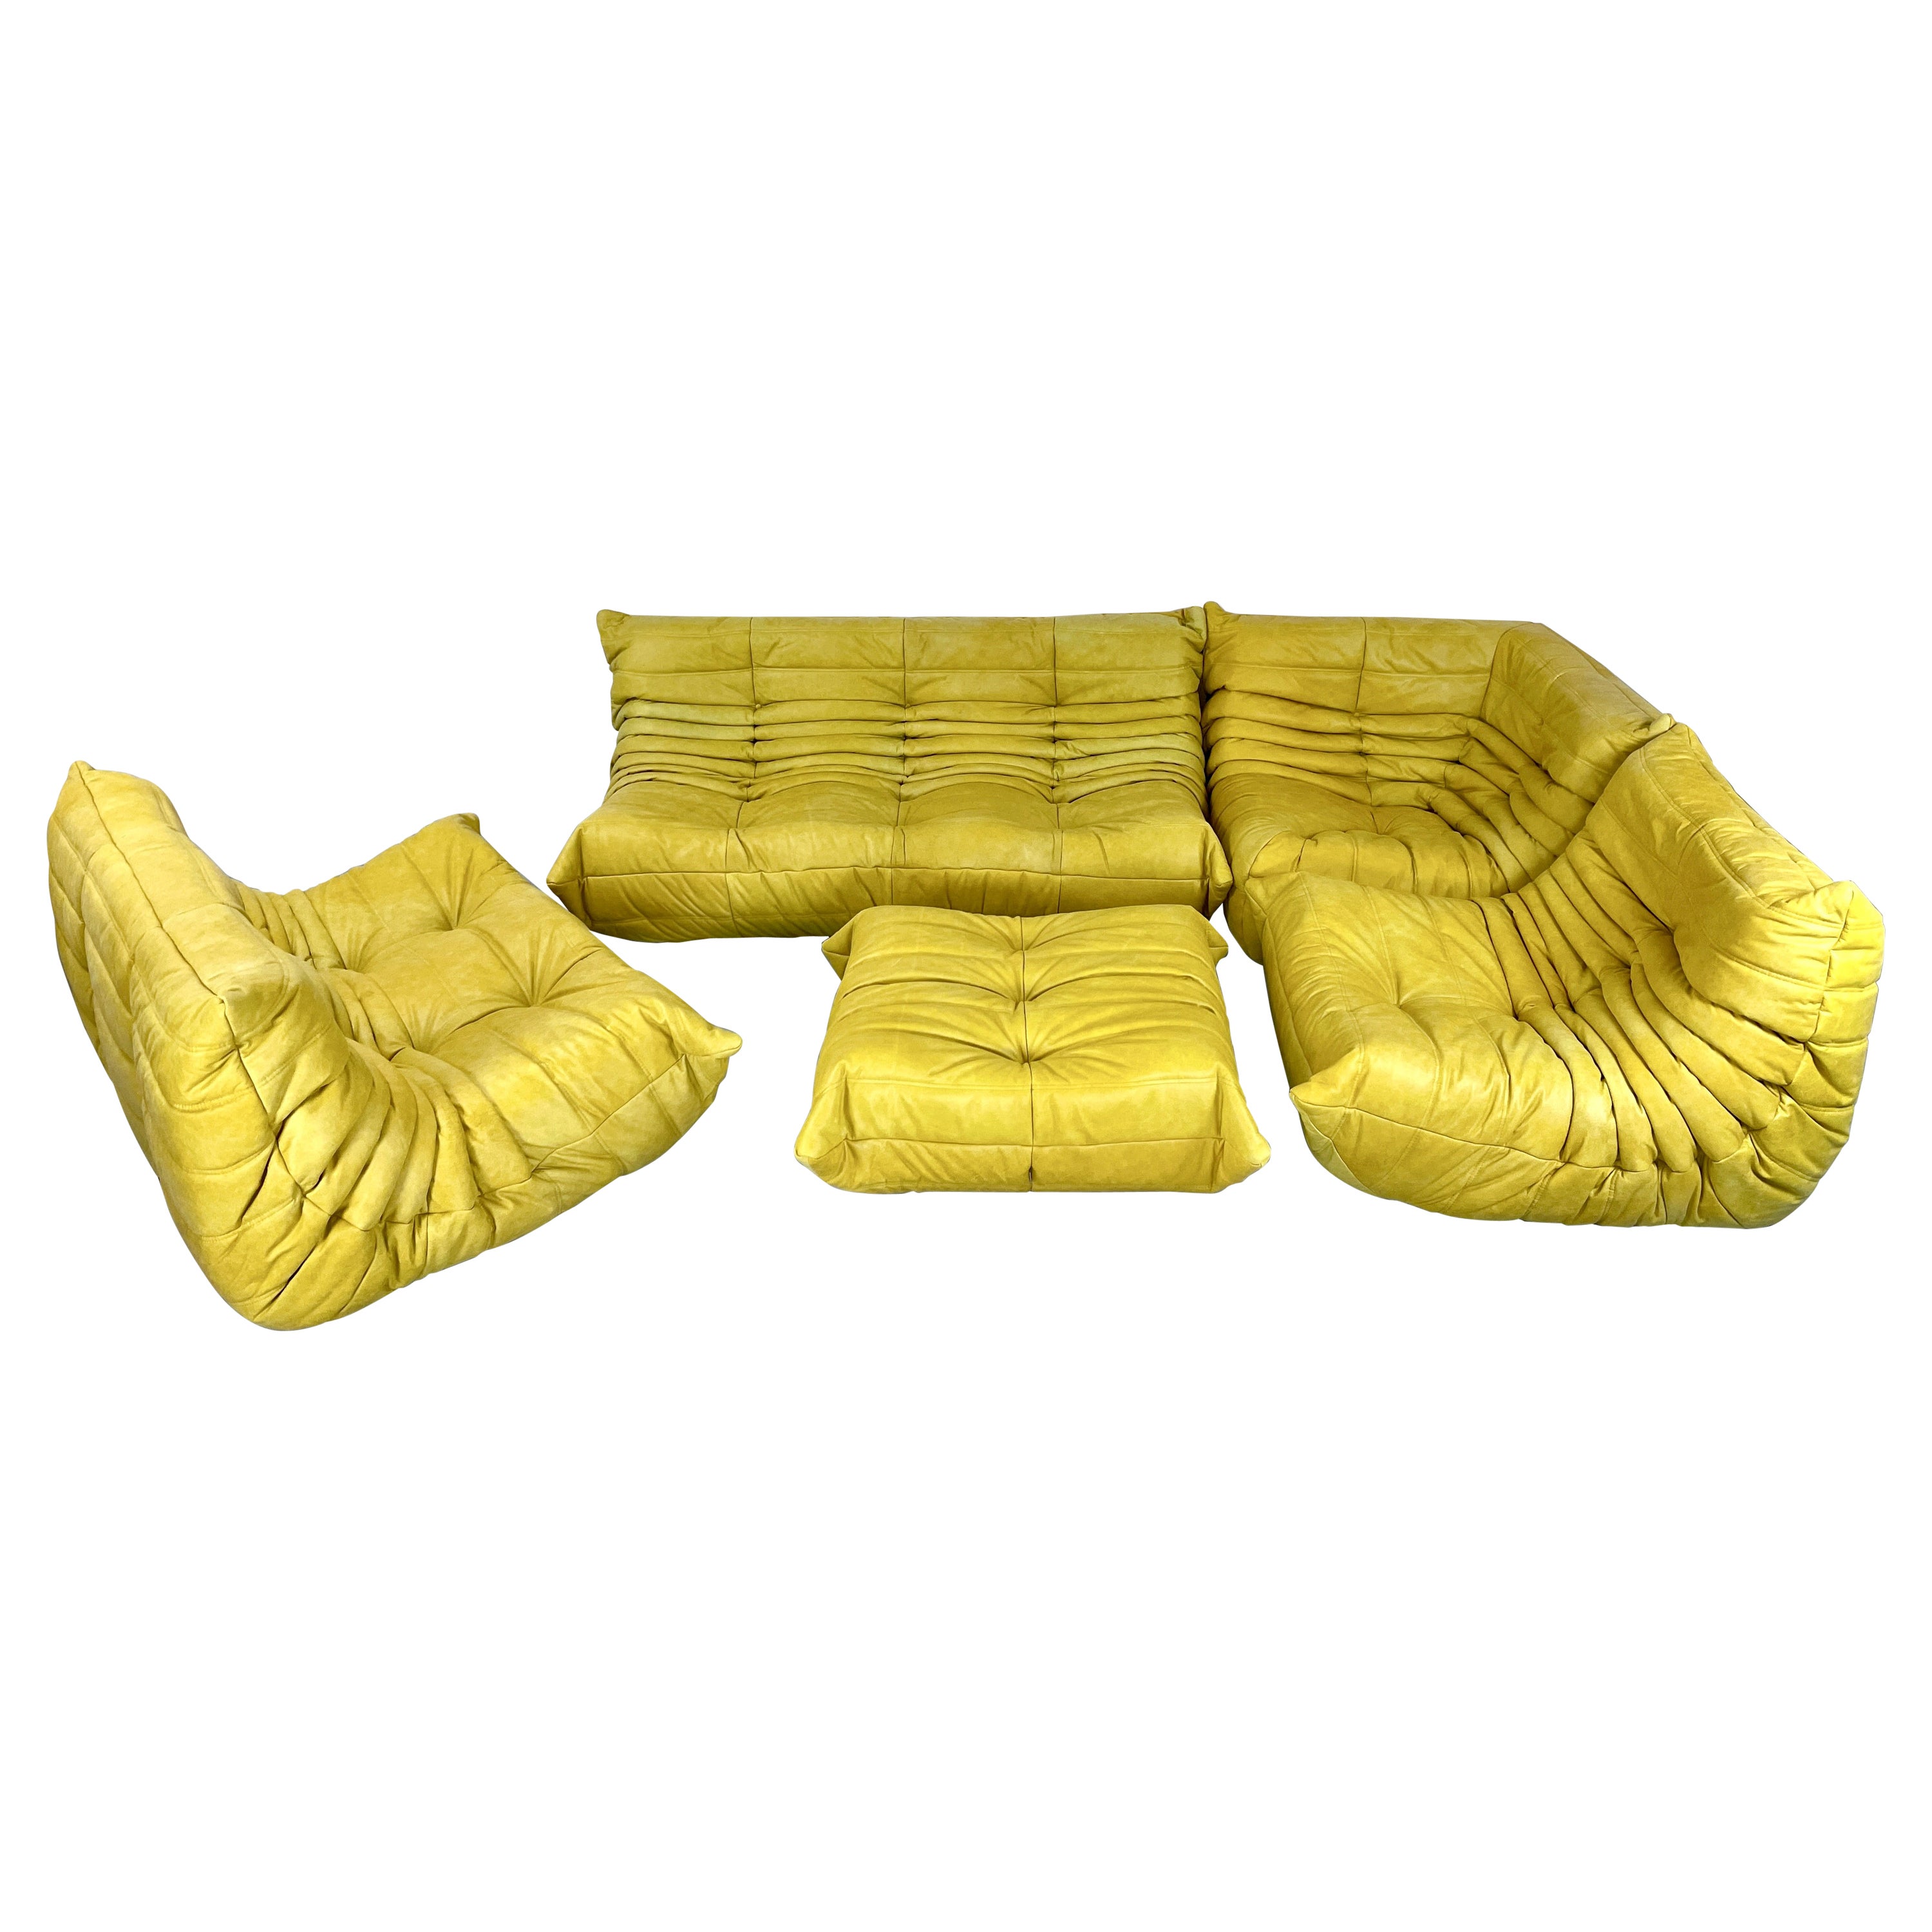 Original Yellow Leather Togo Sofa 5 Pieces by Michel Ducaroy for Ligne Roset